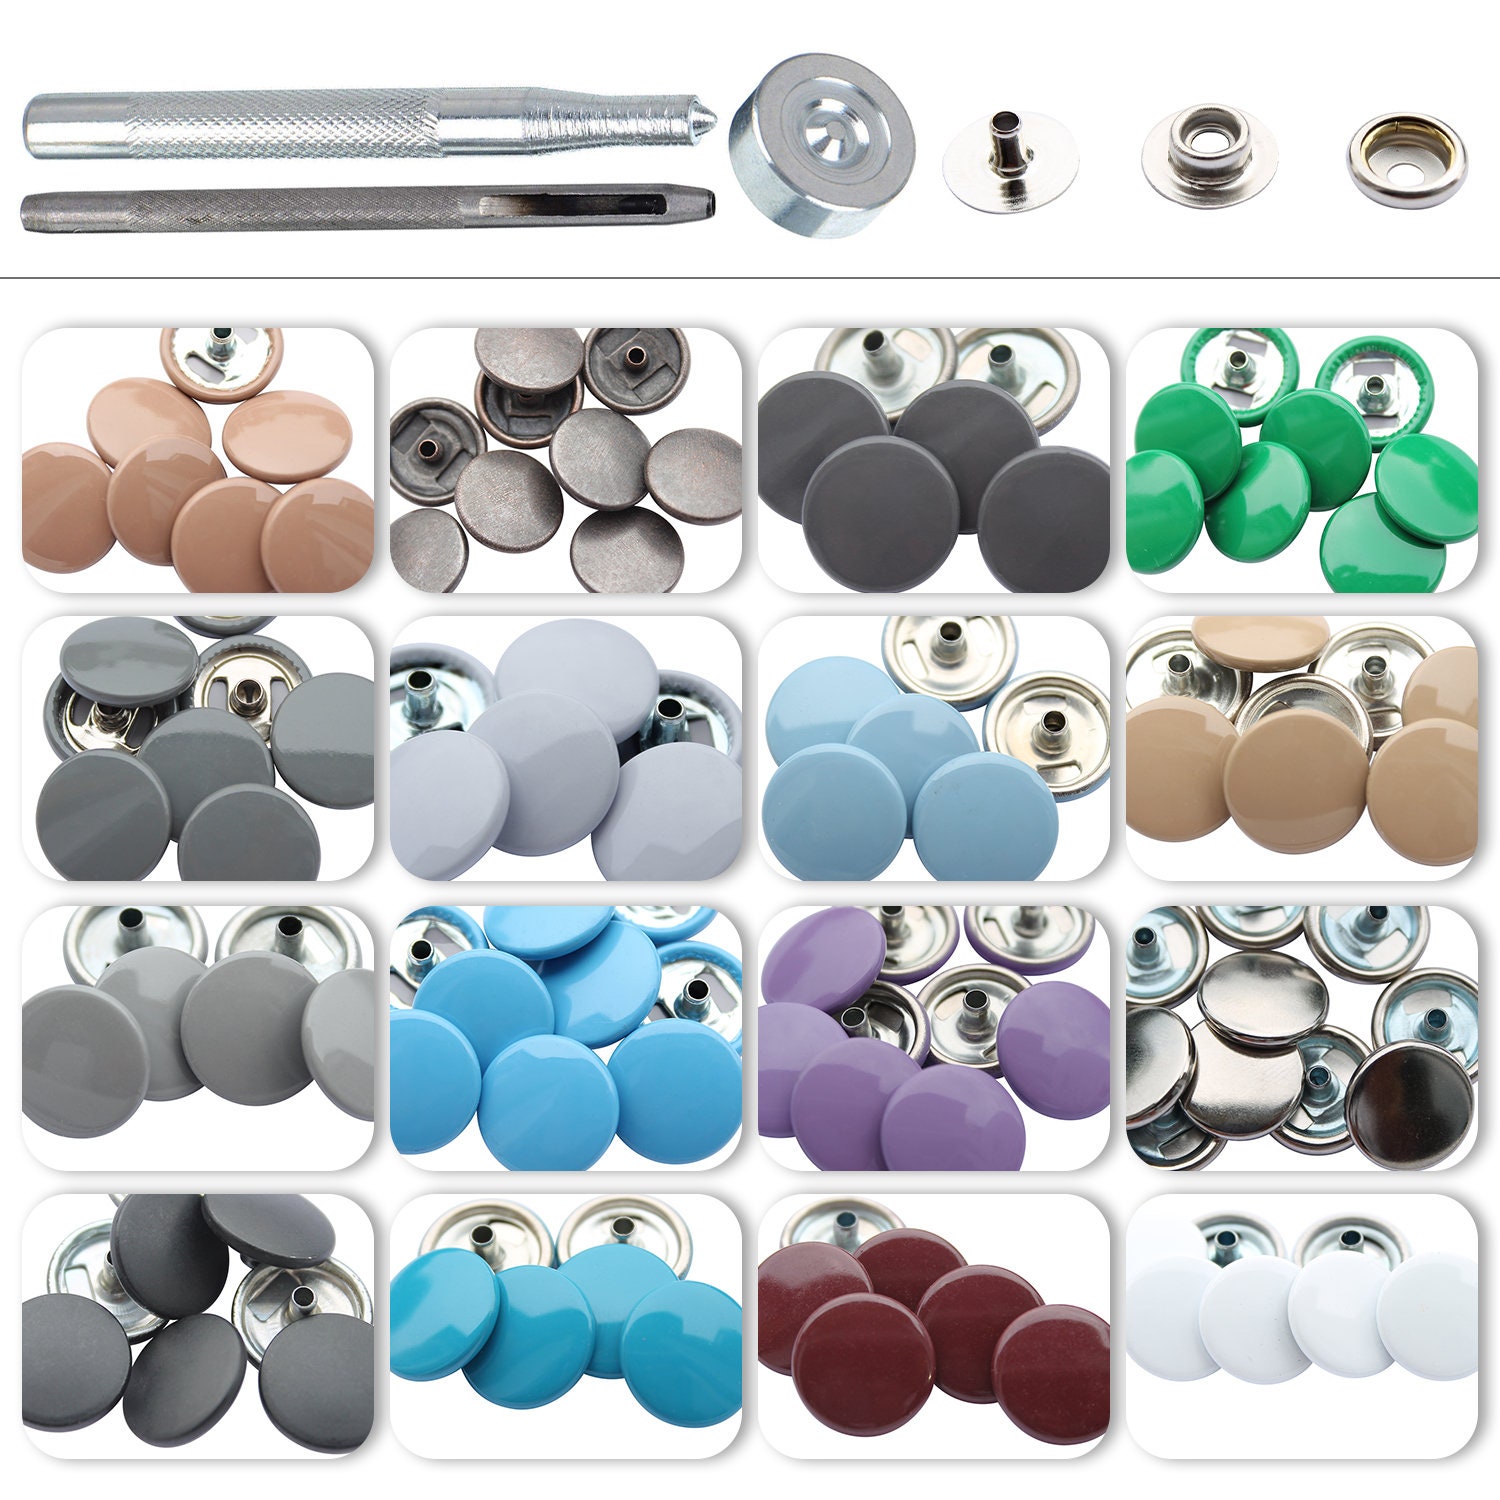 Tiny Metal Snaps for Doll Clothes, Small Bracelets, Key Fobs